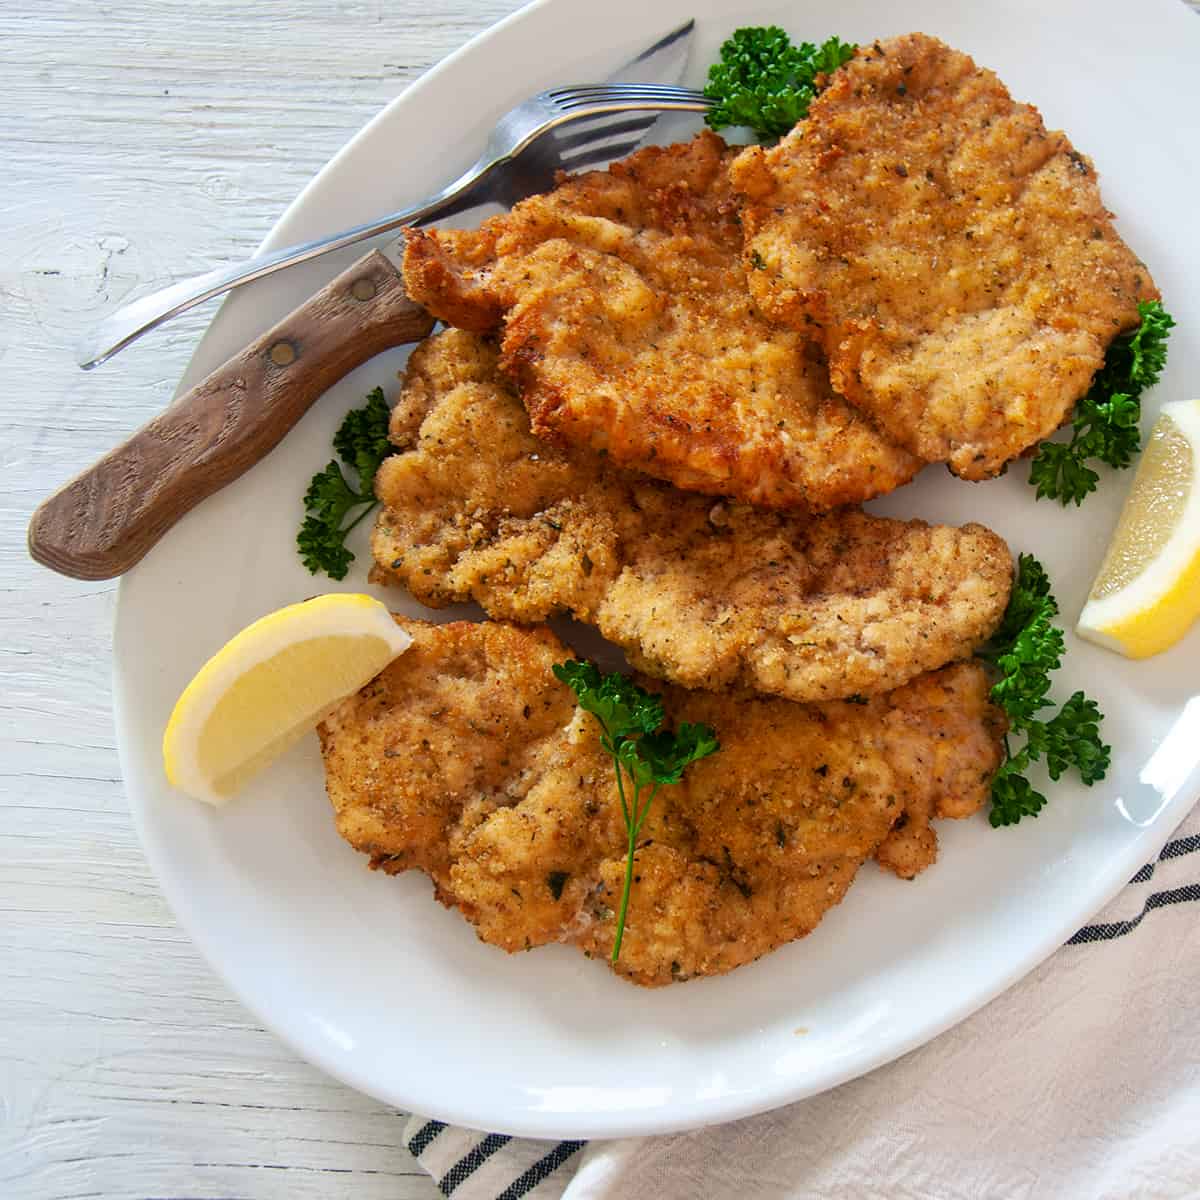 Four Pork Schnitzel cutlets on a large white platter, garnished with parsley and lemon.